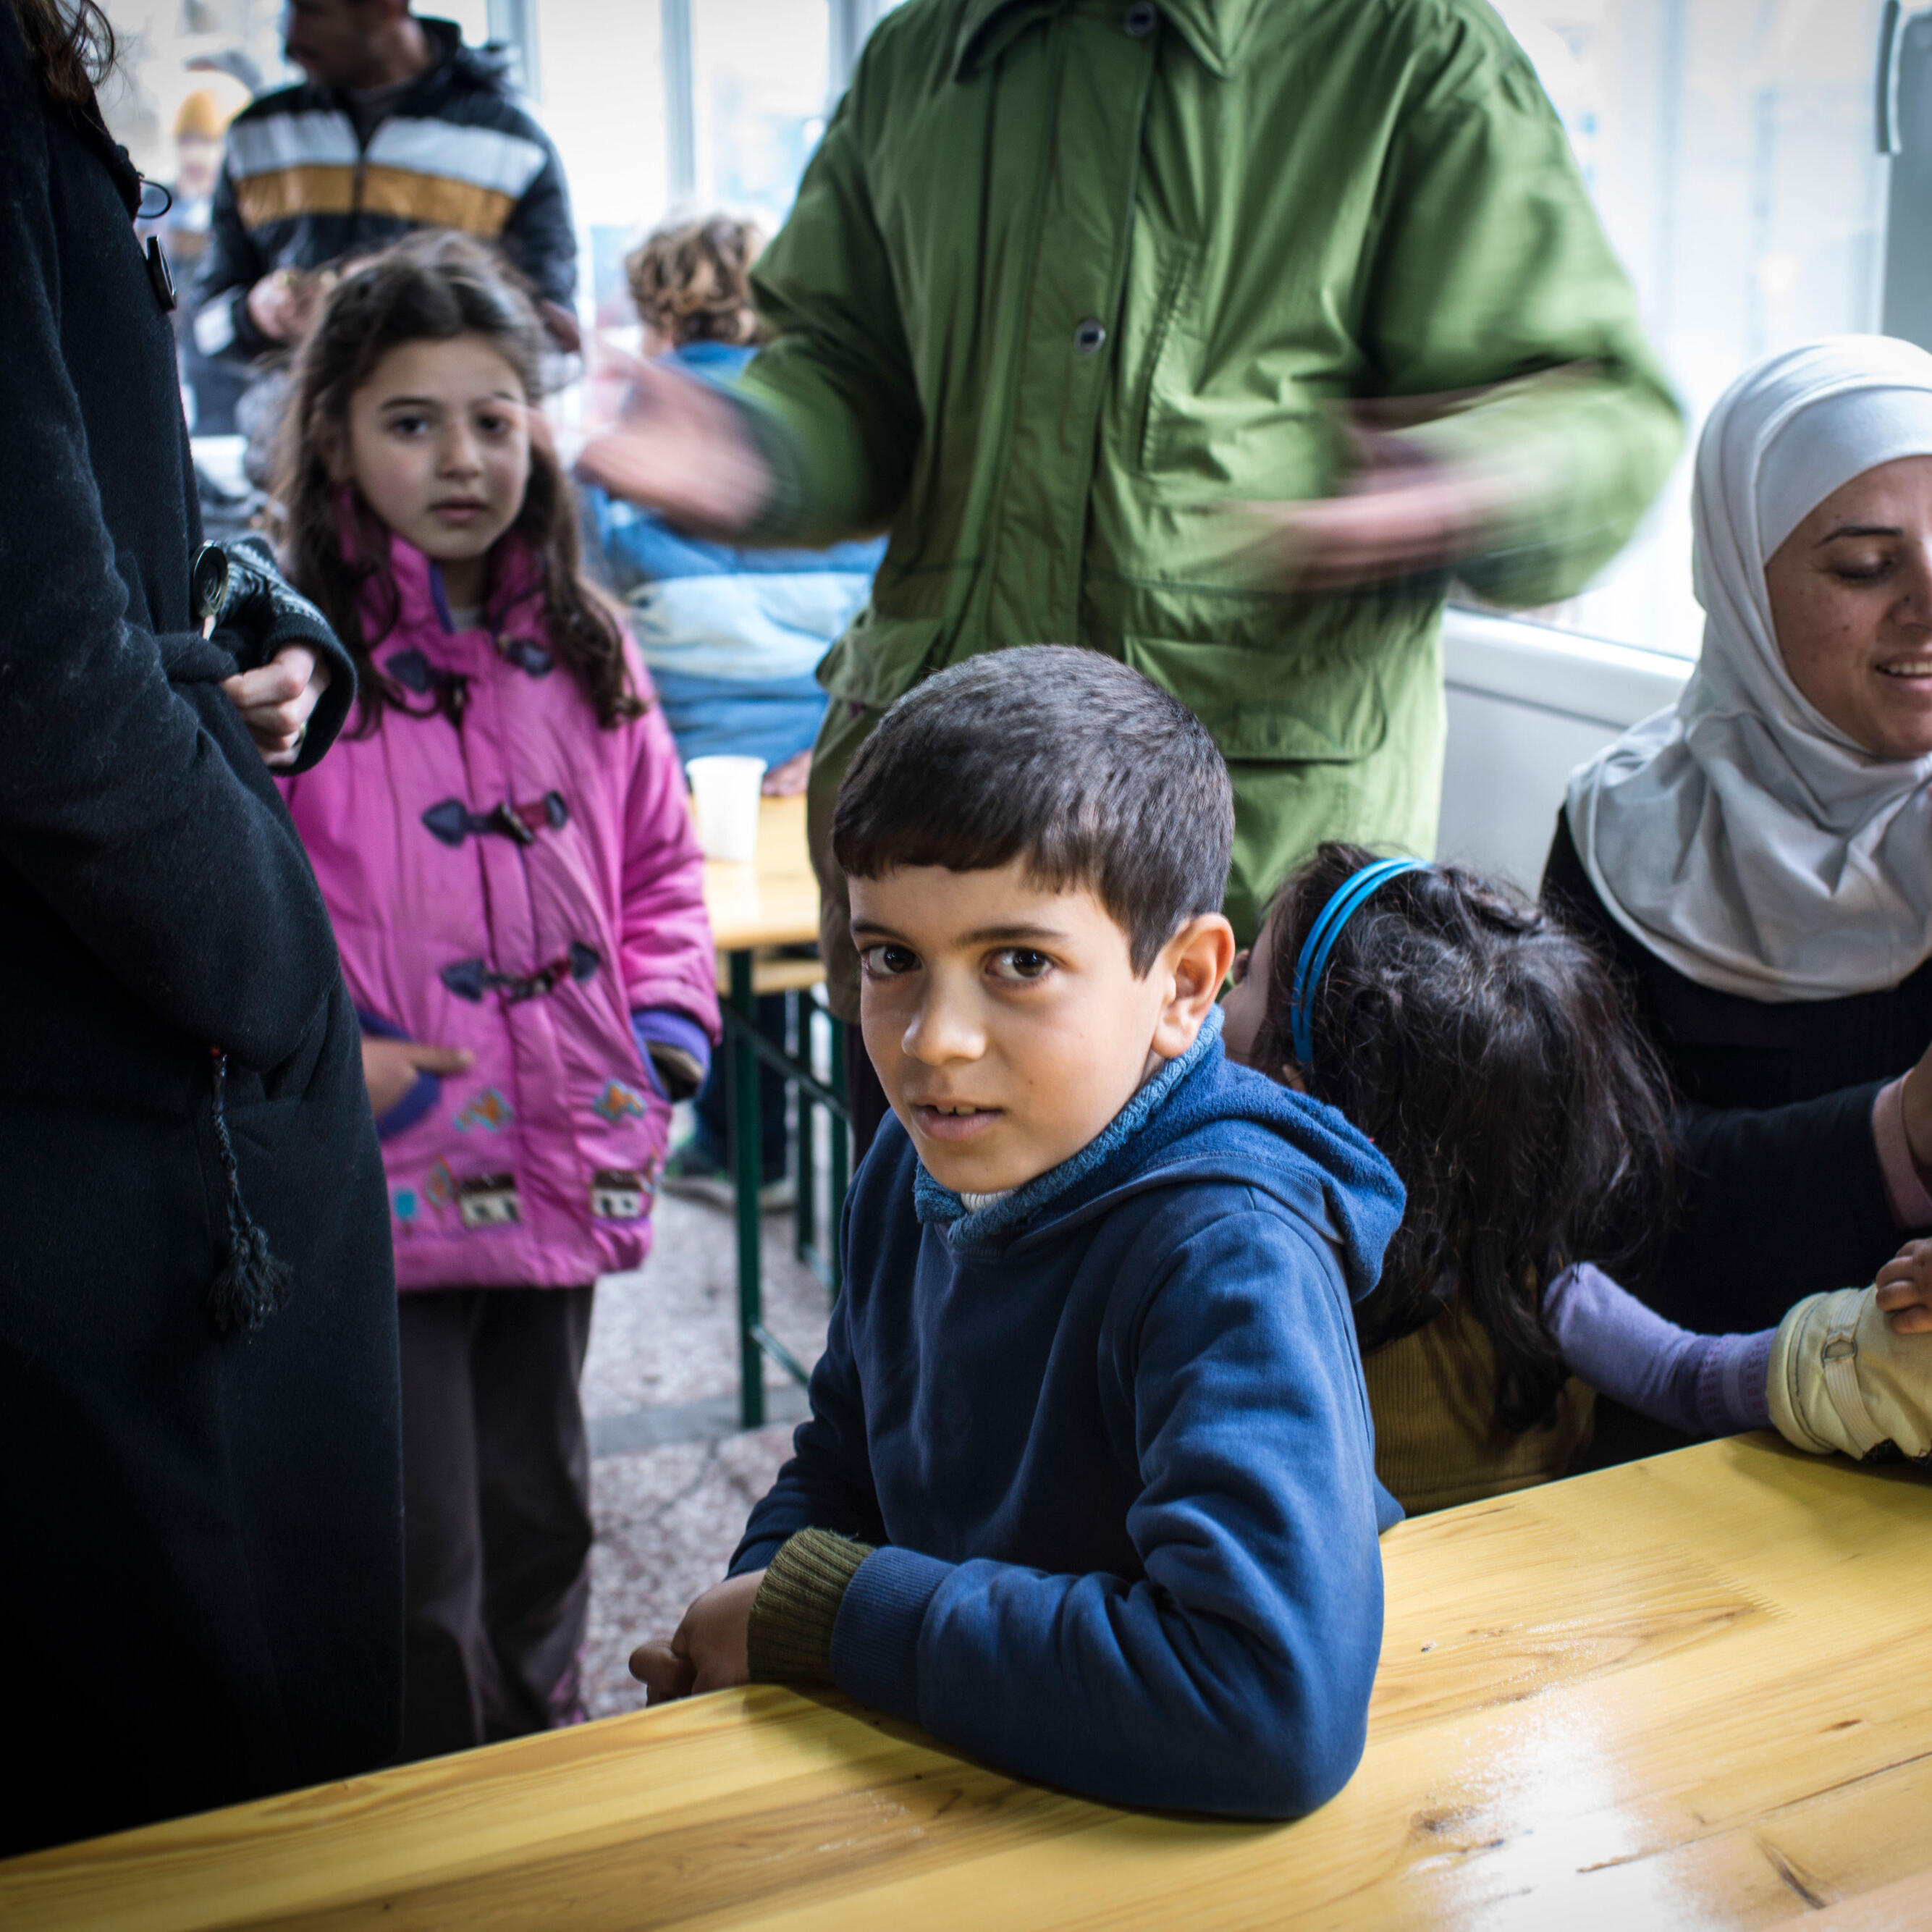 A young boy sits at a table in a refugee shelter in Serbia, surrounded by other children and their families seeking safety in Europe.